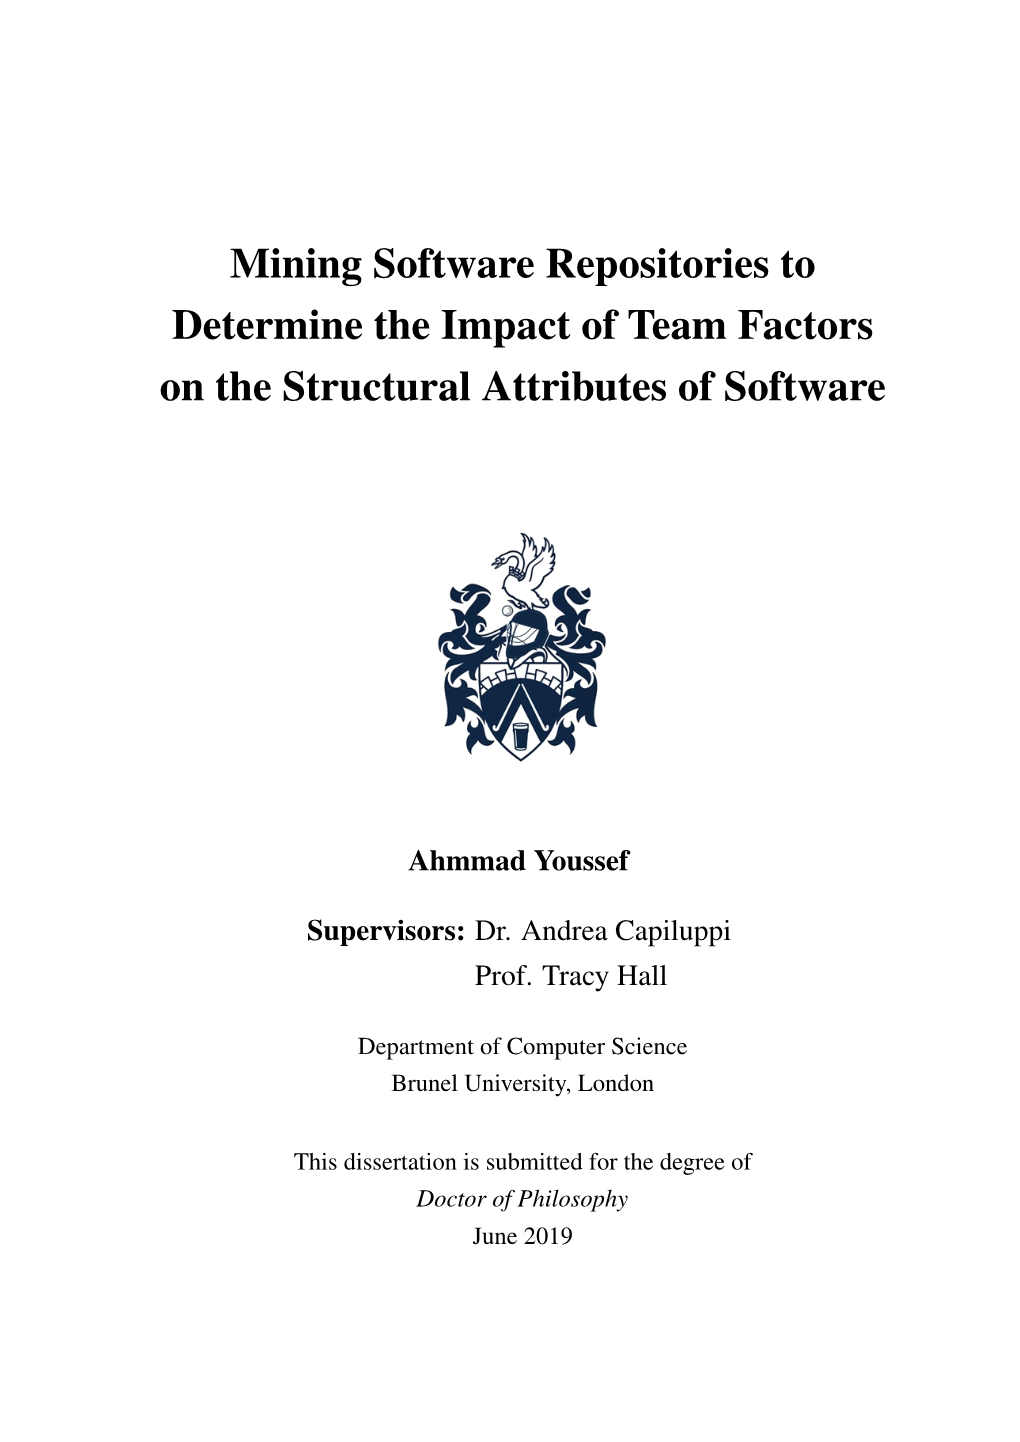 Mining Software Repositories to Determine the Impact of Team Factors on the Structural Attributes of Software